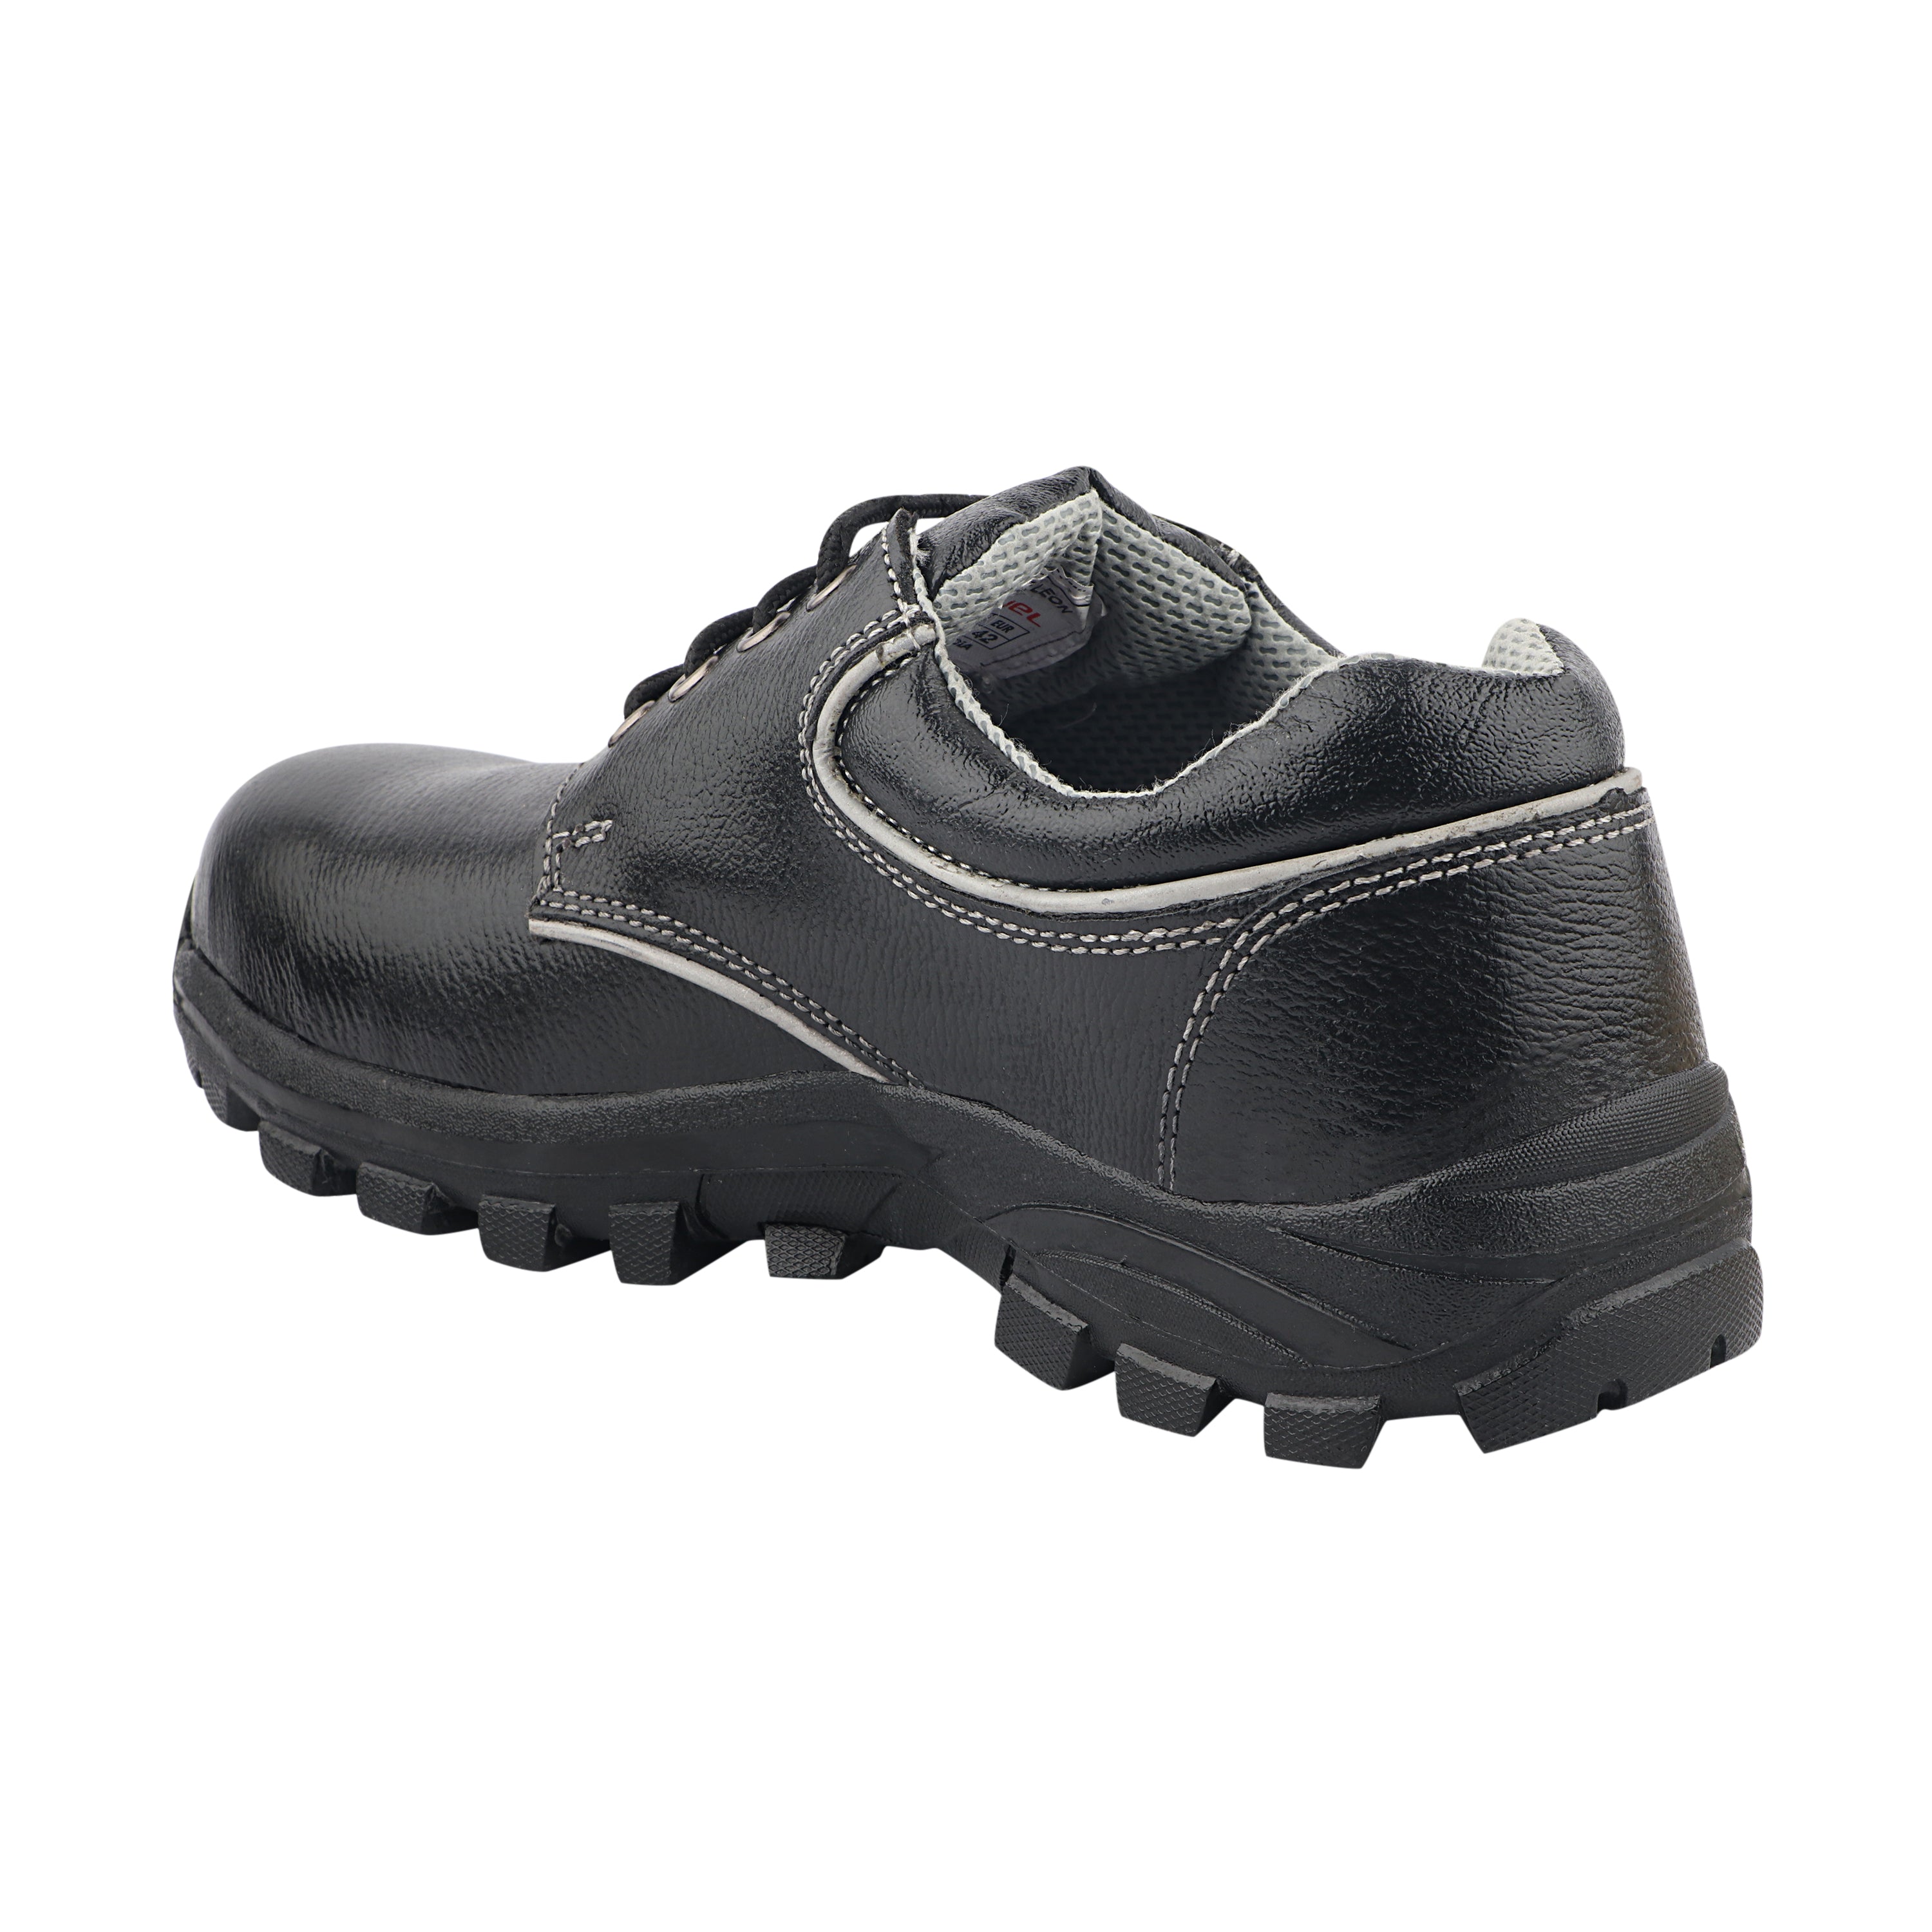 Fuel Leon R Genuine Leather Safety Shoes for Men's Steel Toe Cap With Single Density Rubber Sole (Black)